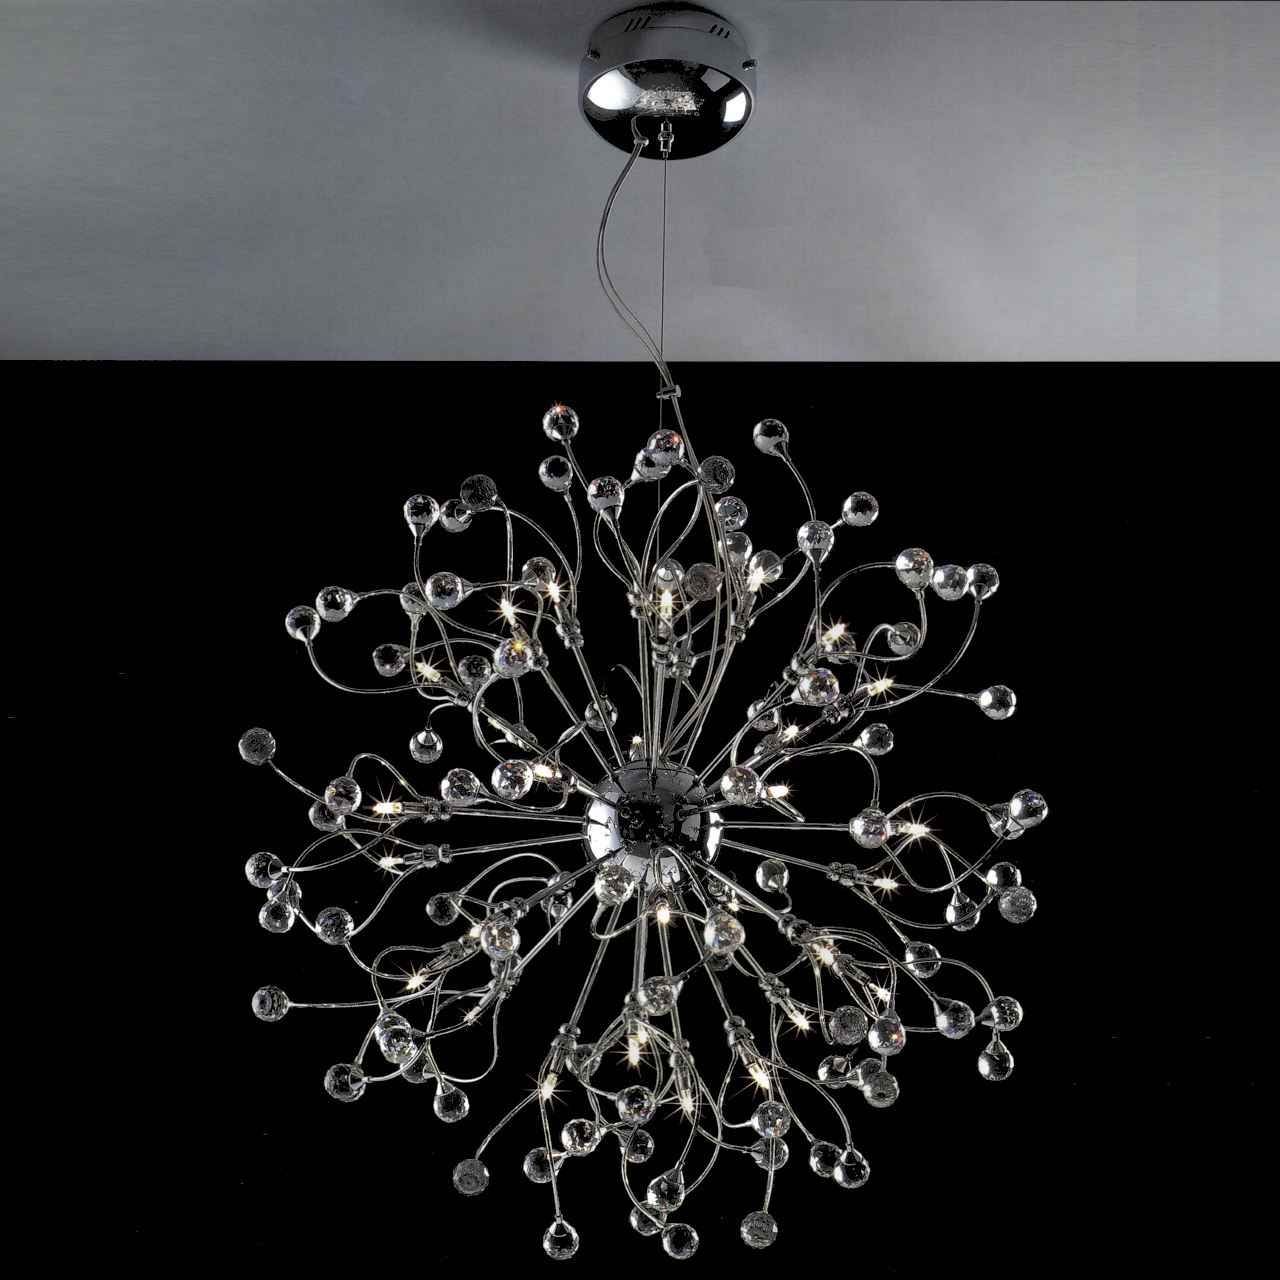 Brizzo Lighting Stores 30 Sfera Modern Crystal Round Chandelier With Modern Chrome Chandeliers (View 3 of 15)